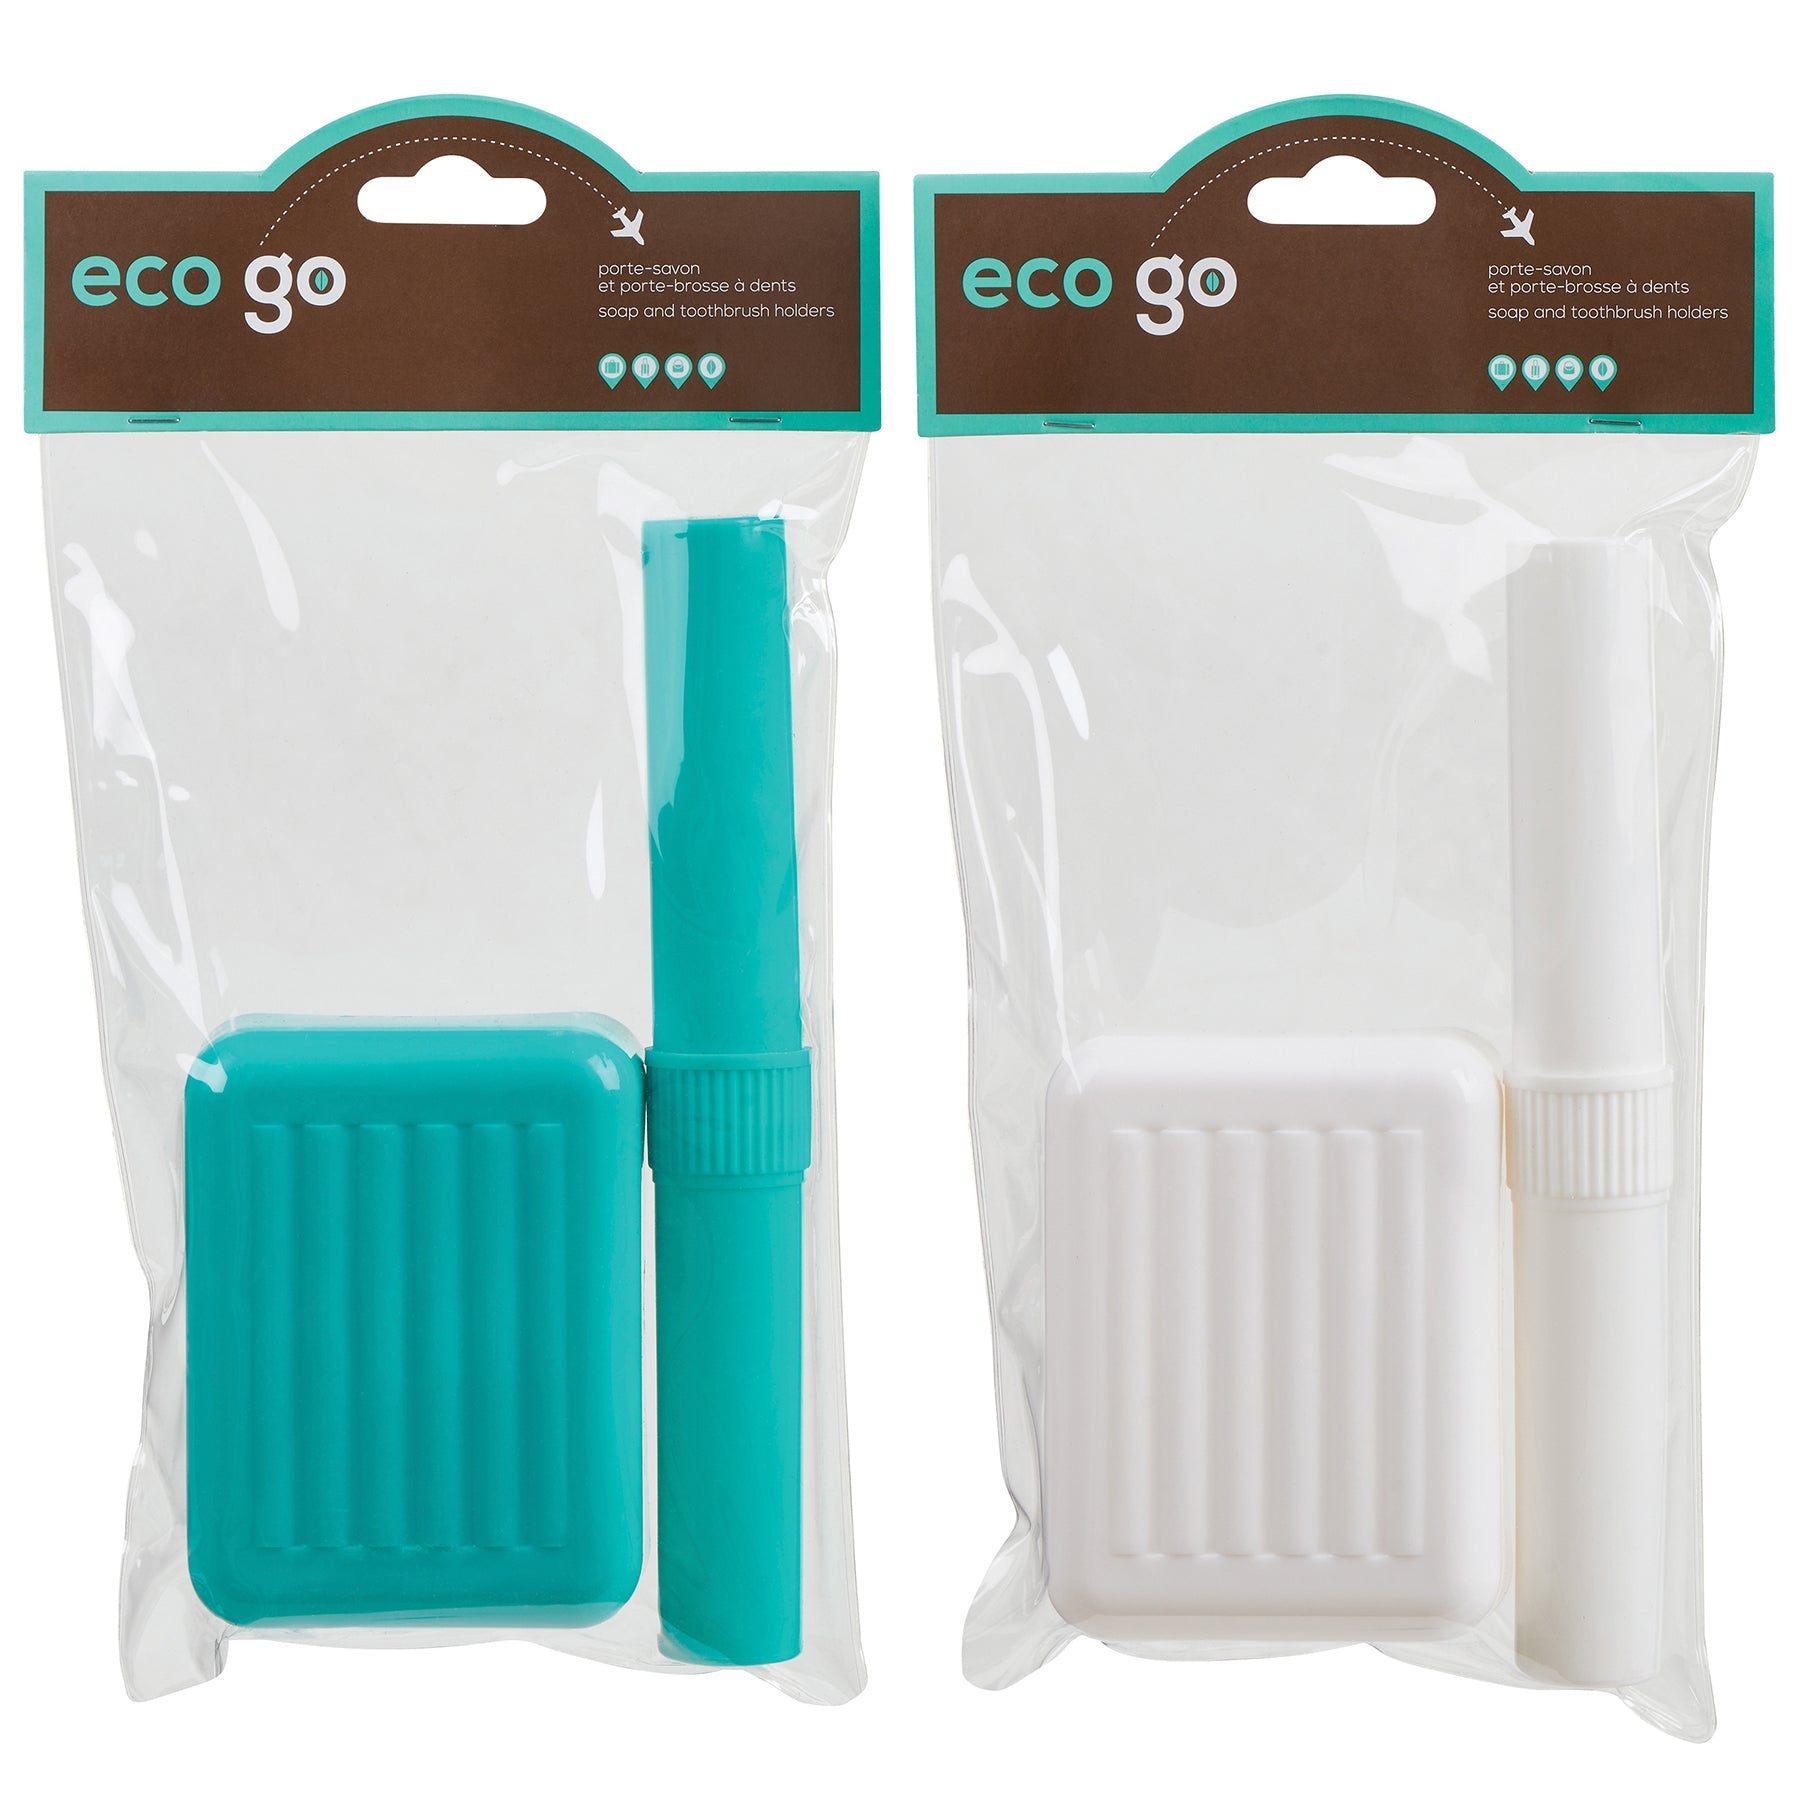 Eco Go Travel 2pcs Soap and Toothbrush Holder 4x3x1.8in - 8in